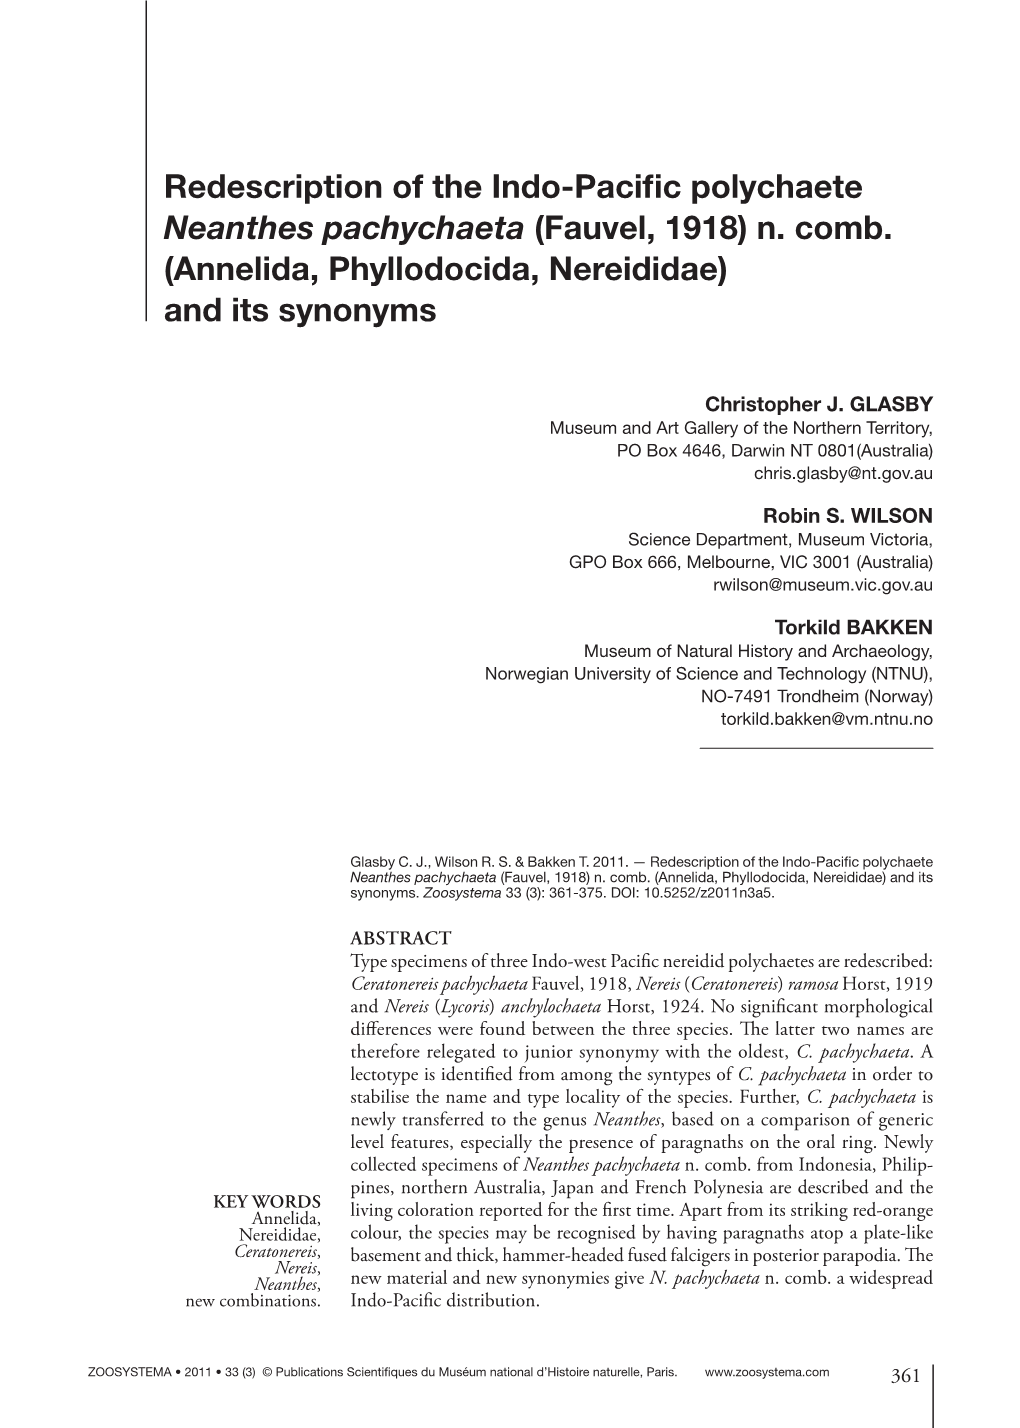 Redescription of the Indo-Pacific Polychaete Neanthes Pachychaeta